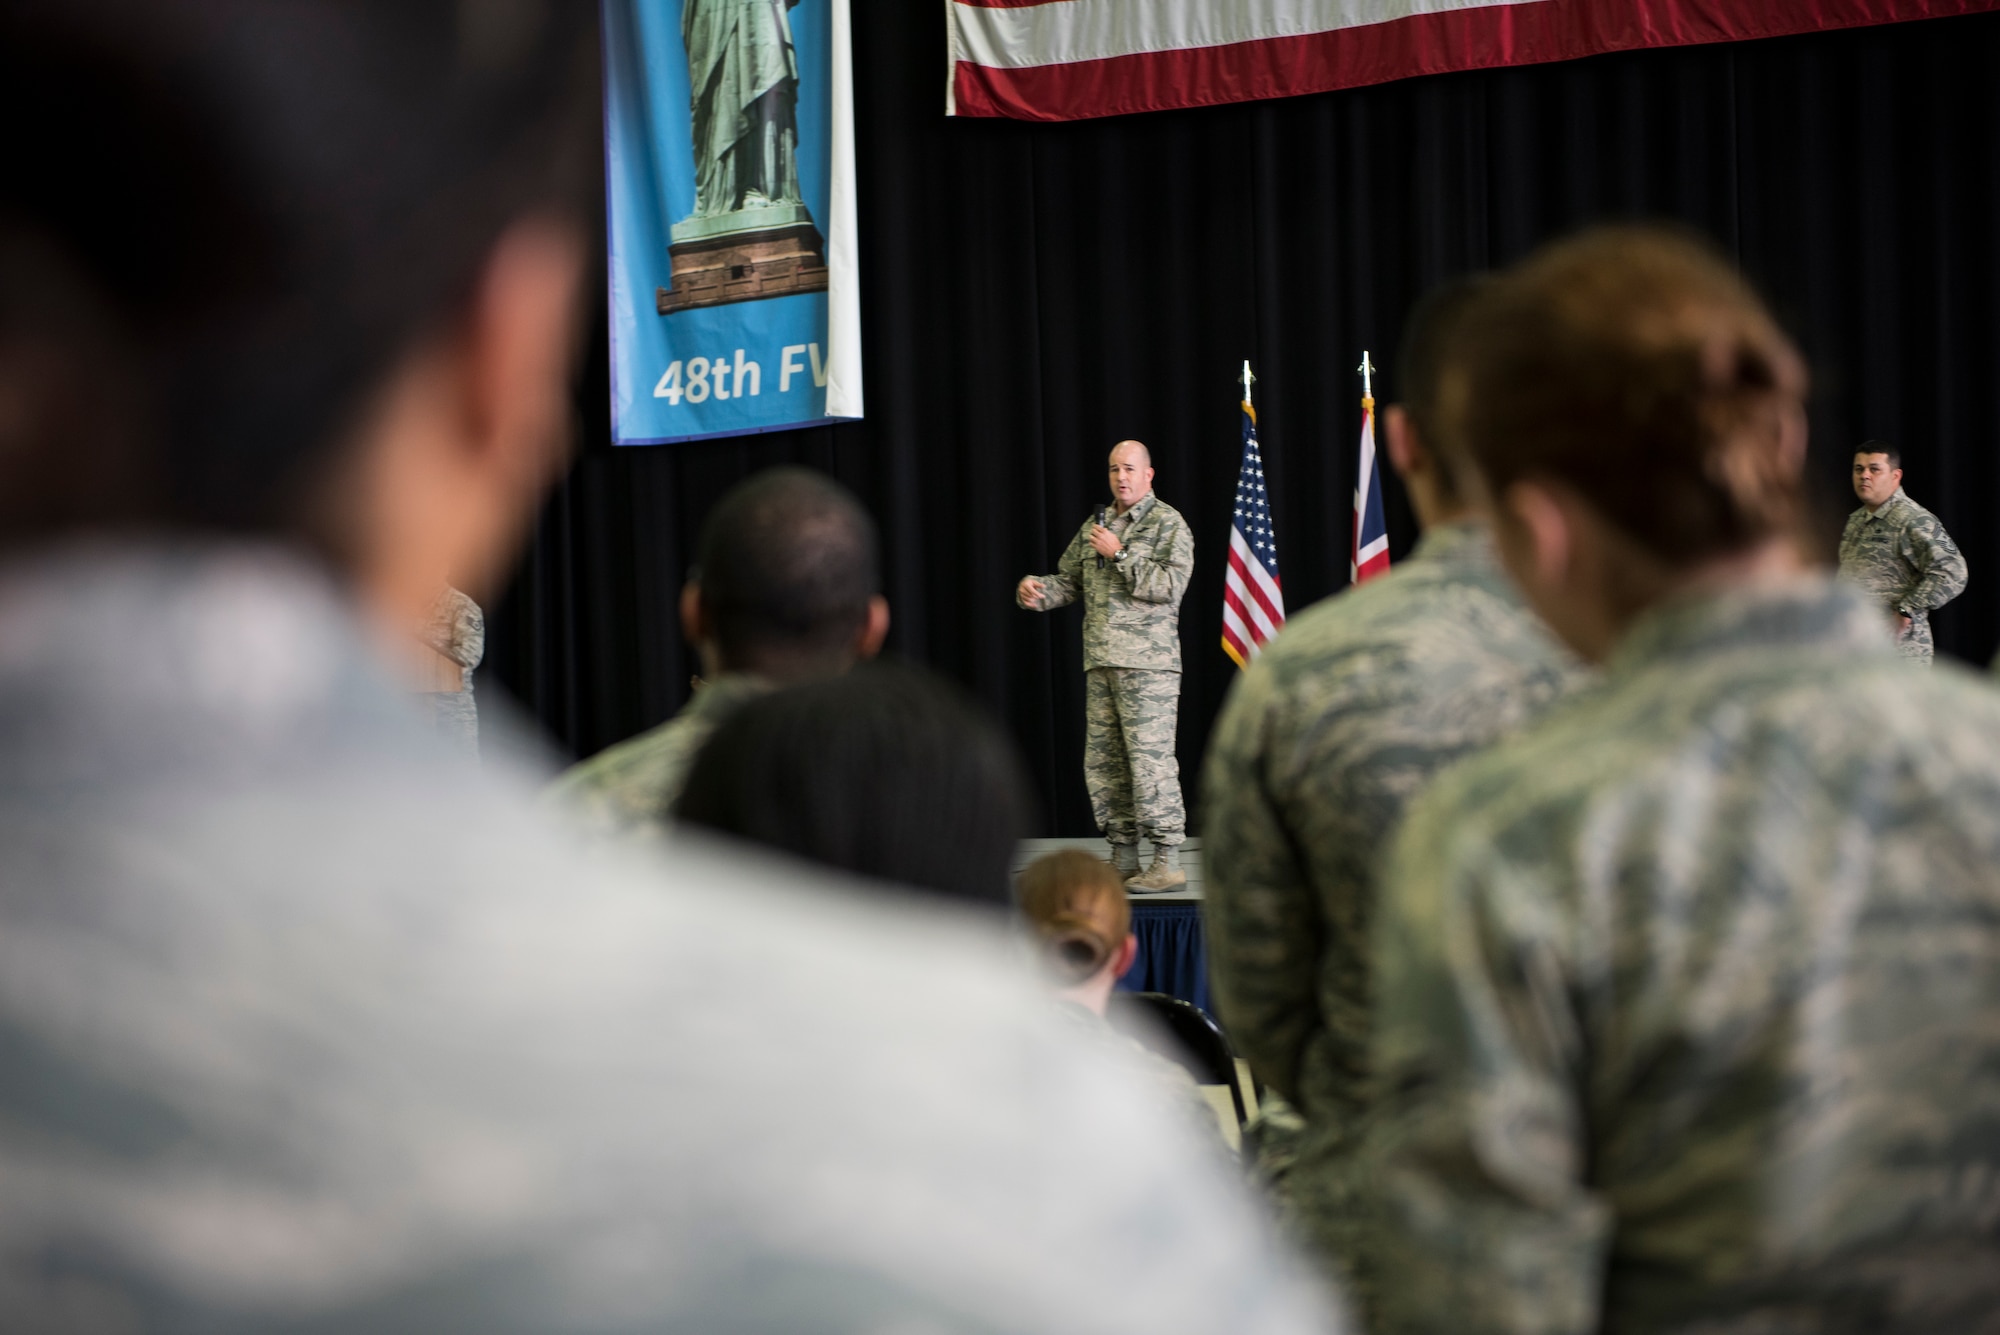 U.S. Air Force Col. William Marshall, 48th Fighter Wing commander, speaks to Liberty Wing Airmen during an All Call at Royal Air Force Lakenheath, England, July 20, 2018. Marshall explained his top priorities and vision for the wing including readiness, preparing for the future, and developing and retaining Airmen. (U.S. Air Force photo/ Senior Airman Malcolm Mayfield)